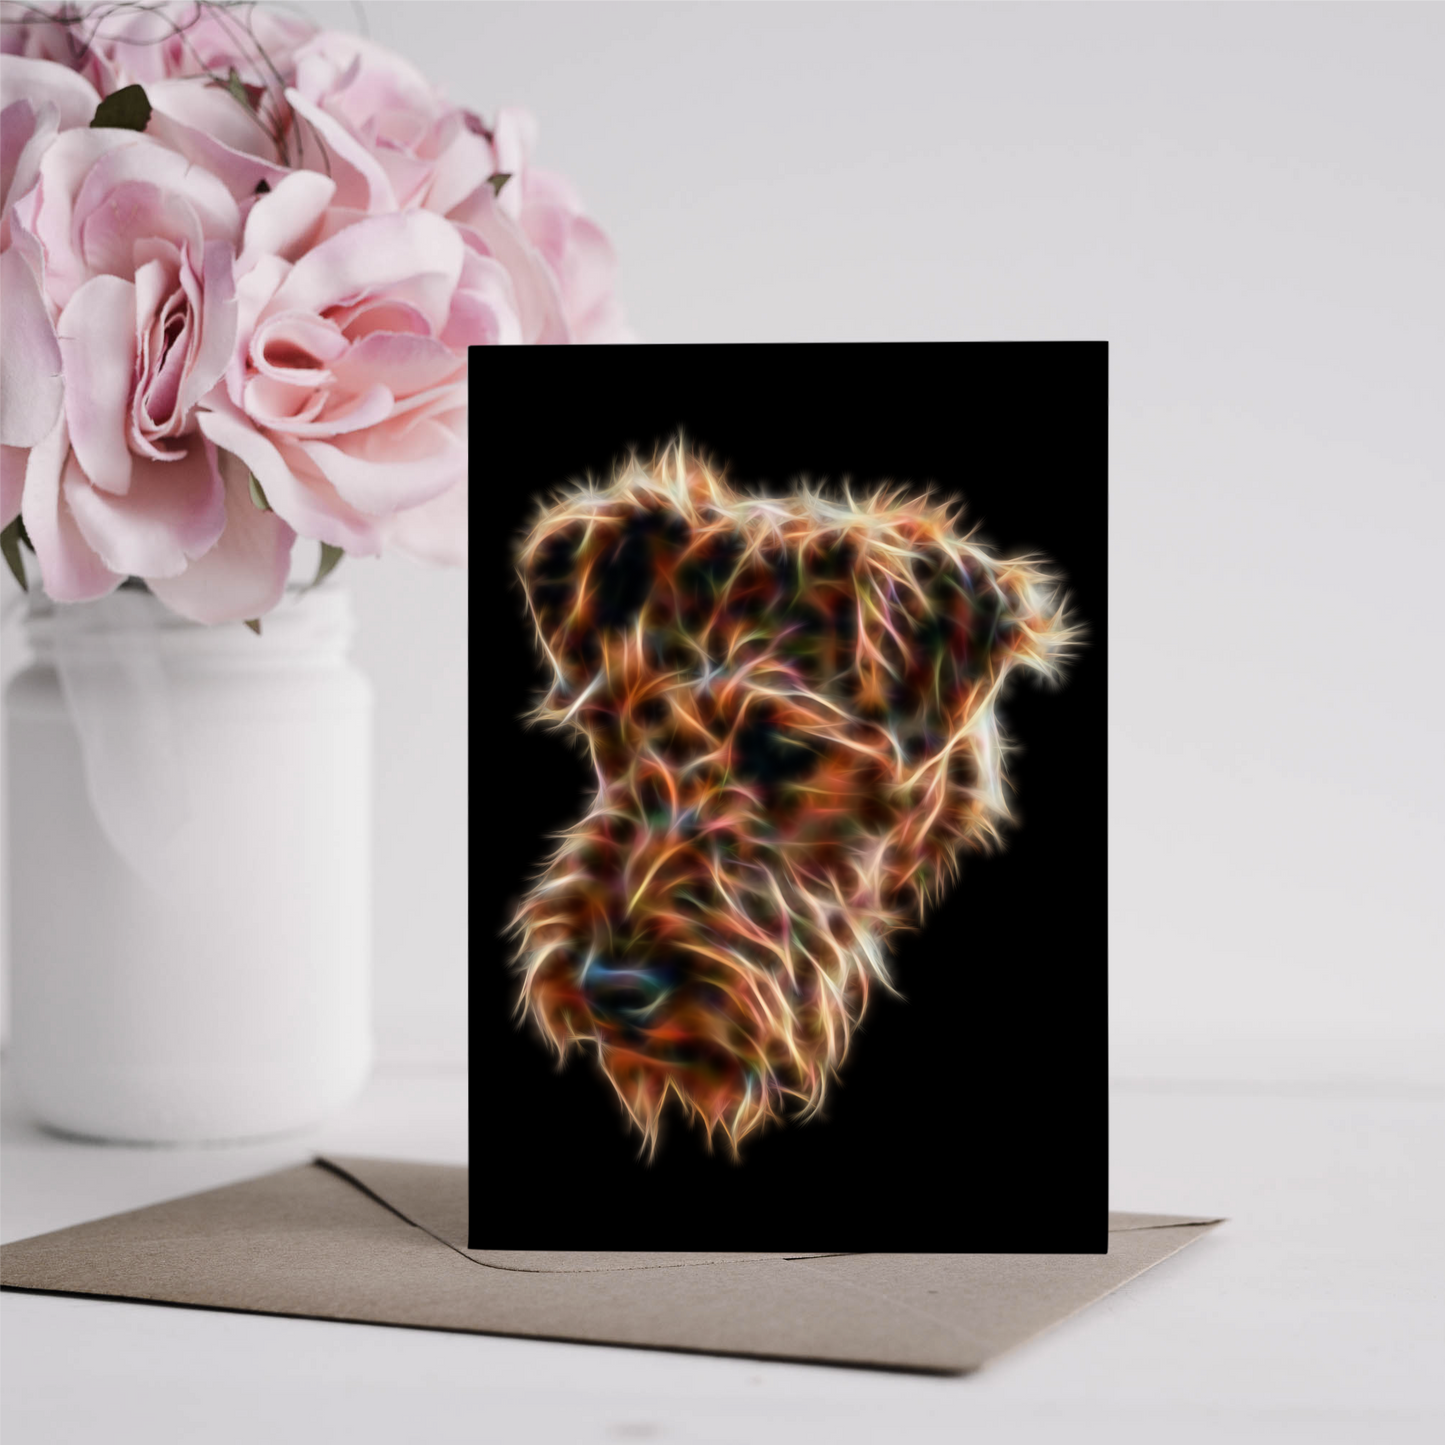 Airedale Terrier Greeting Card Blank Inside for Birthdays or any other Occasion